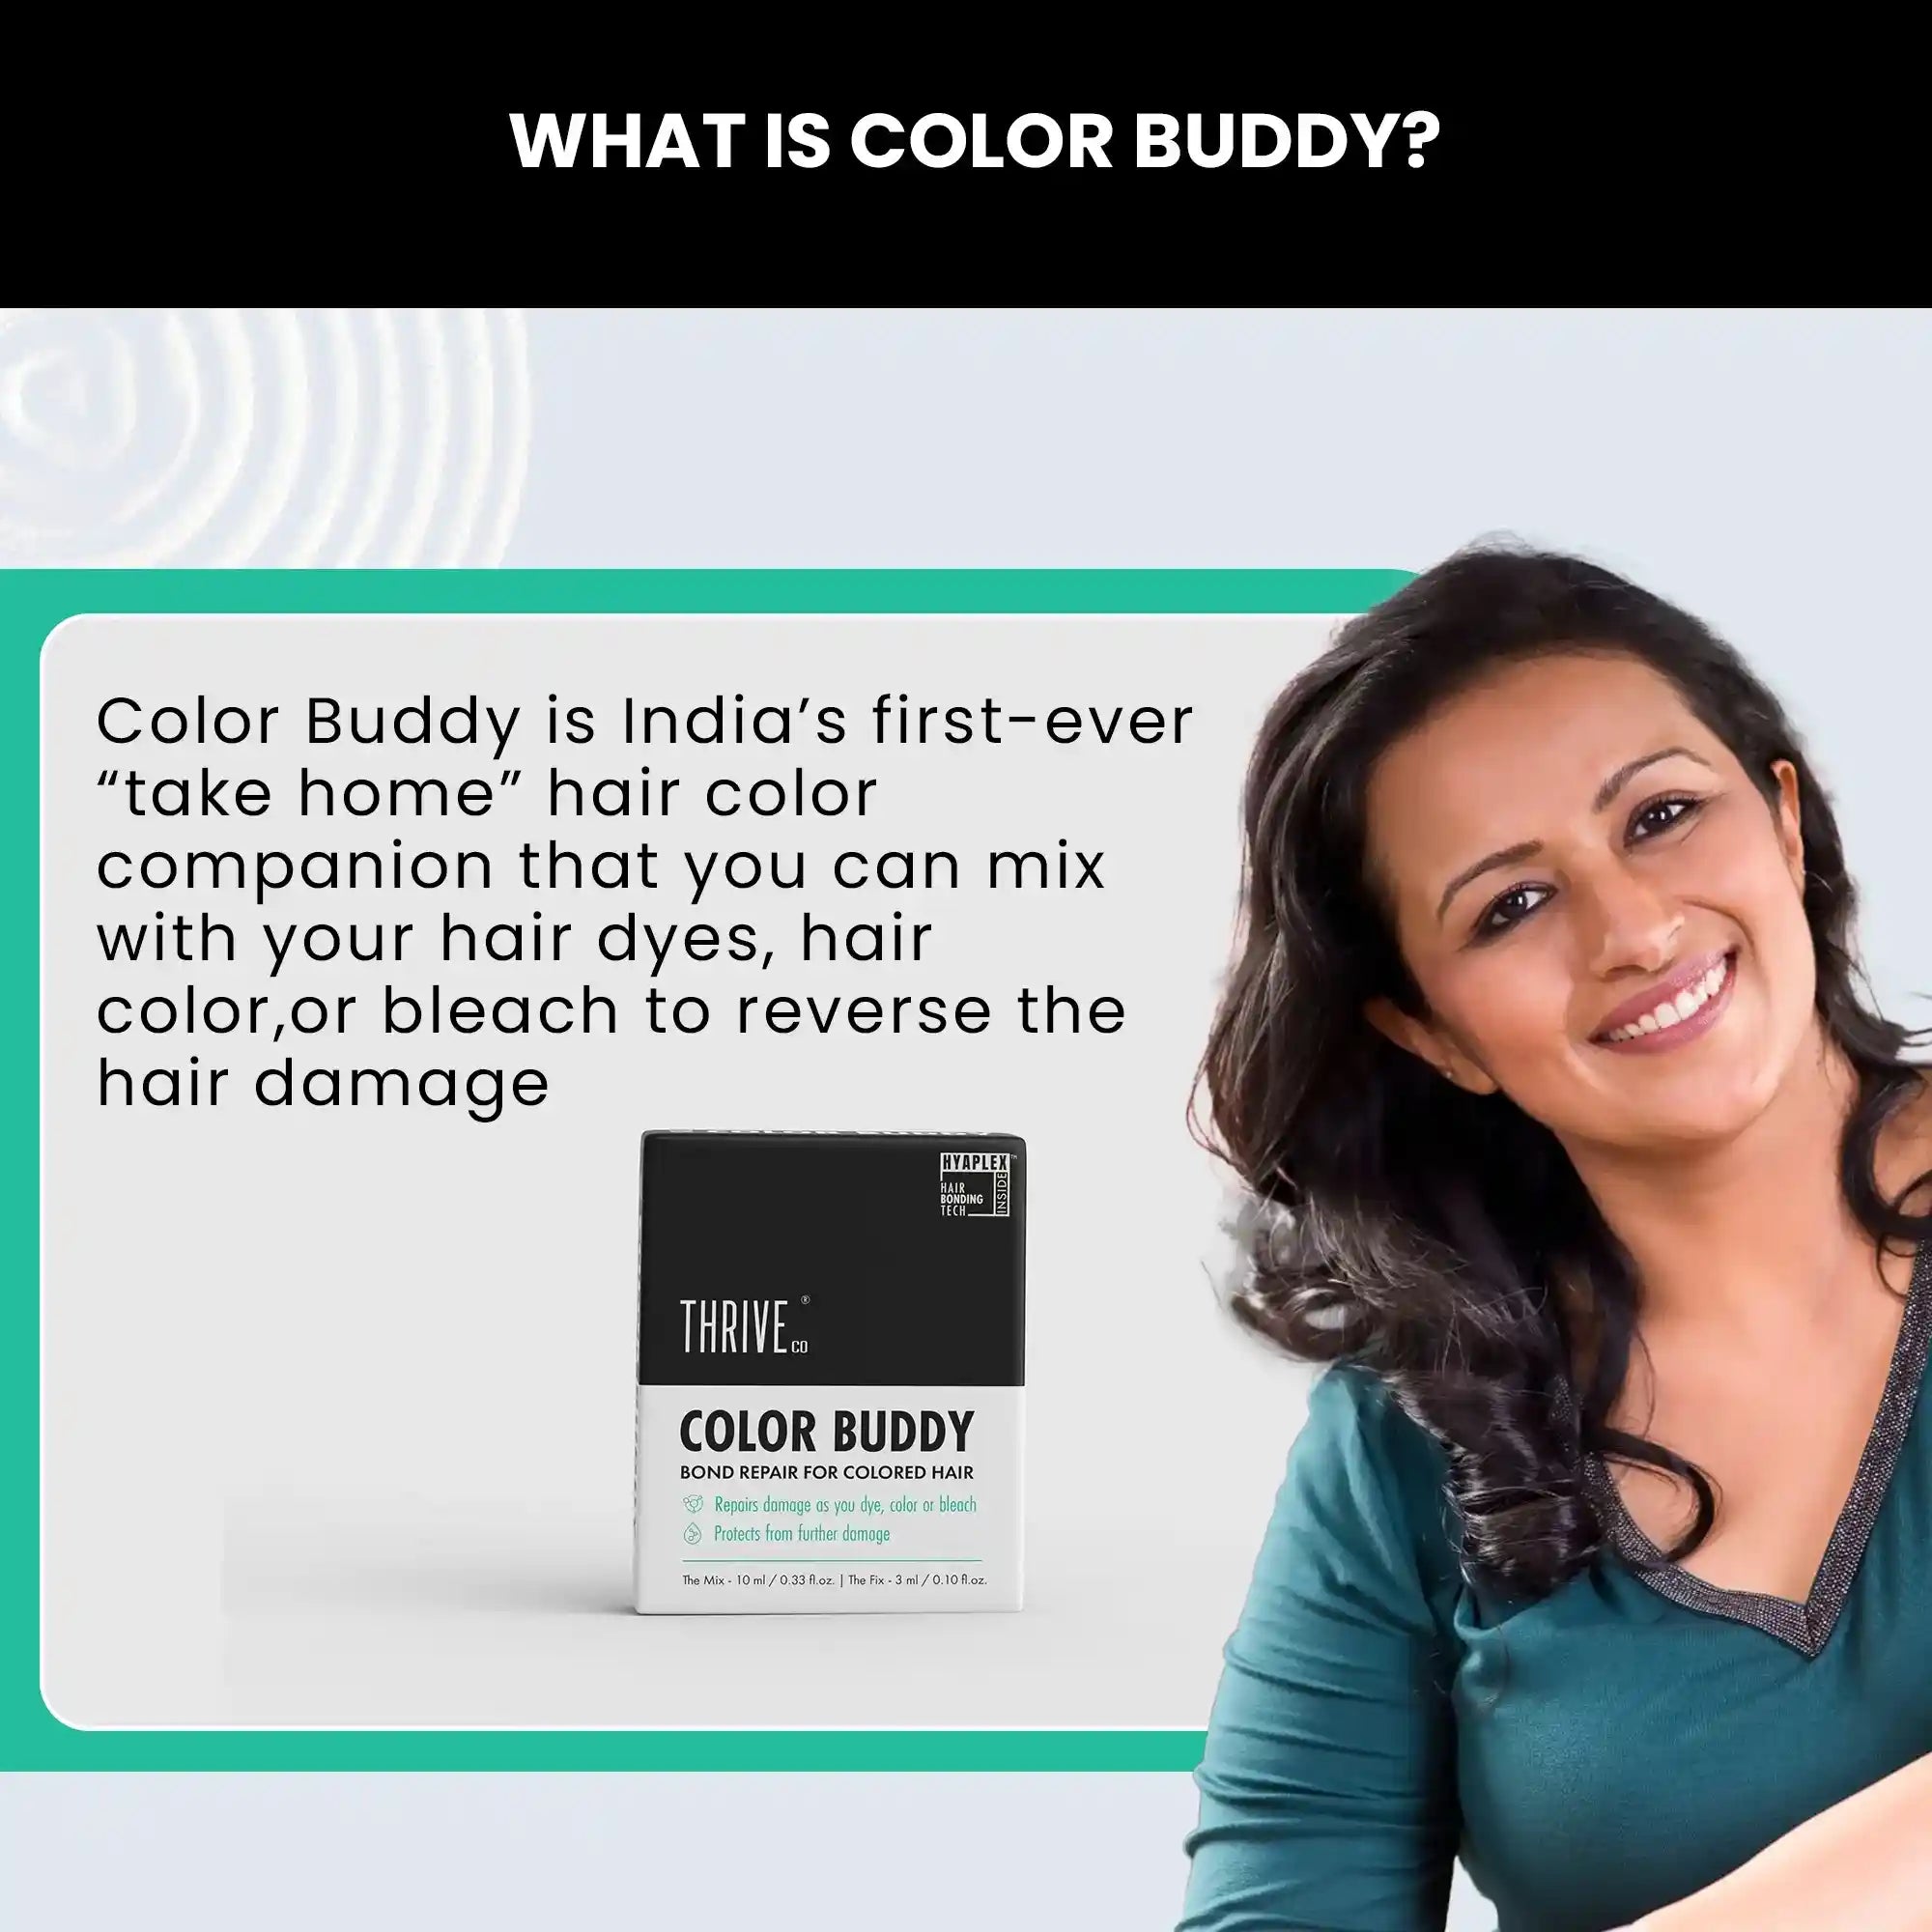 mix color buddy with your hair dye hair color or bleach to reverse the hair damage